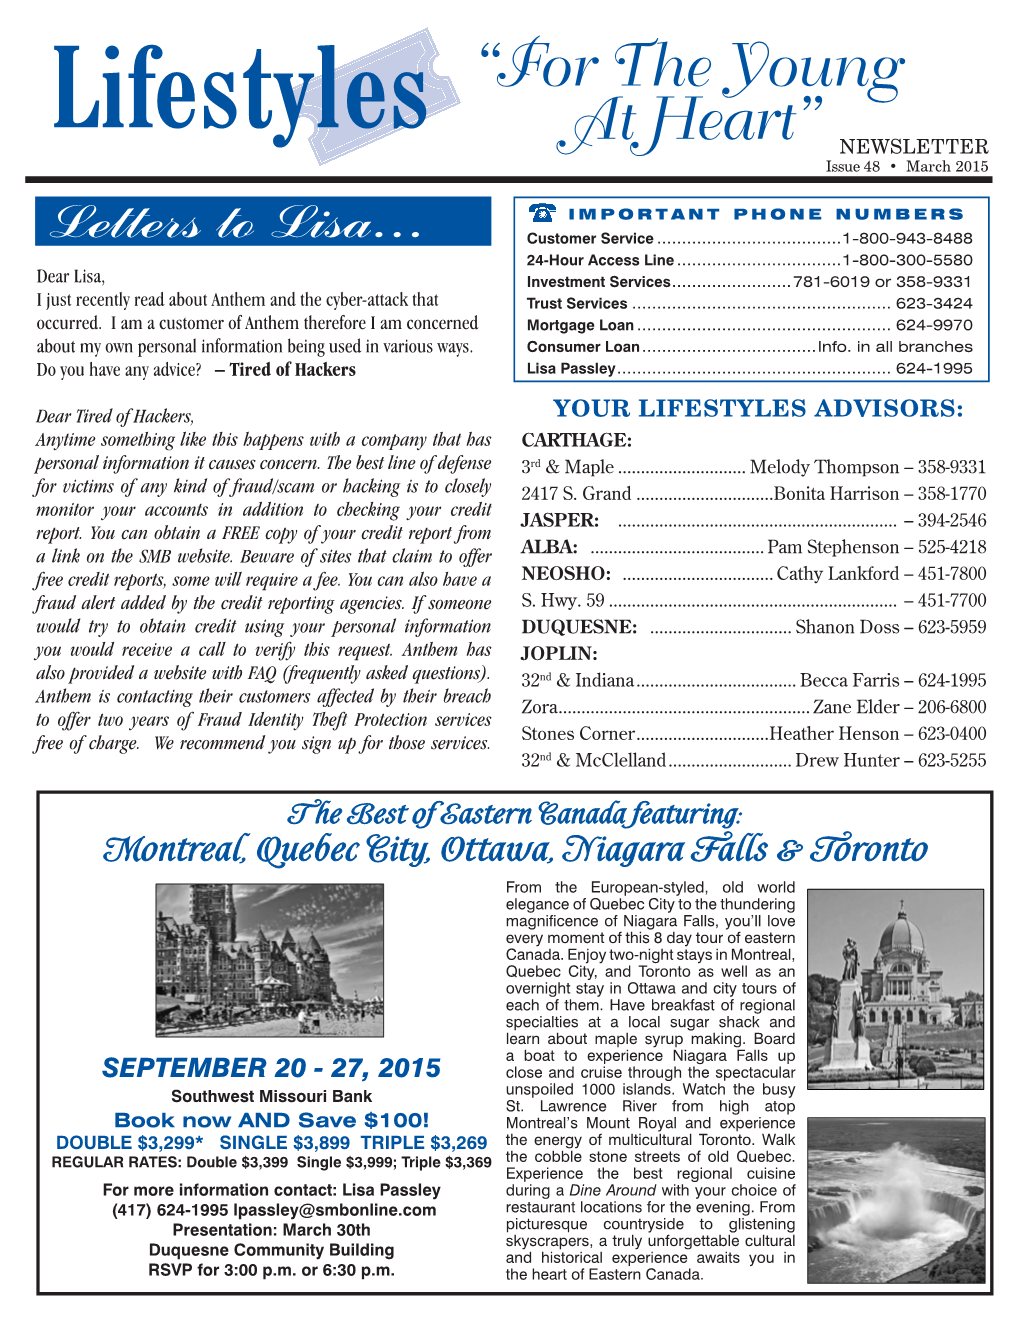 Lifestyles “For the Young at Heart” NEWSLETTER Issue 48 • March 2015